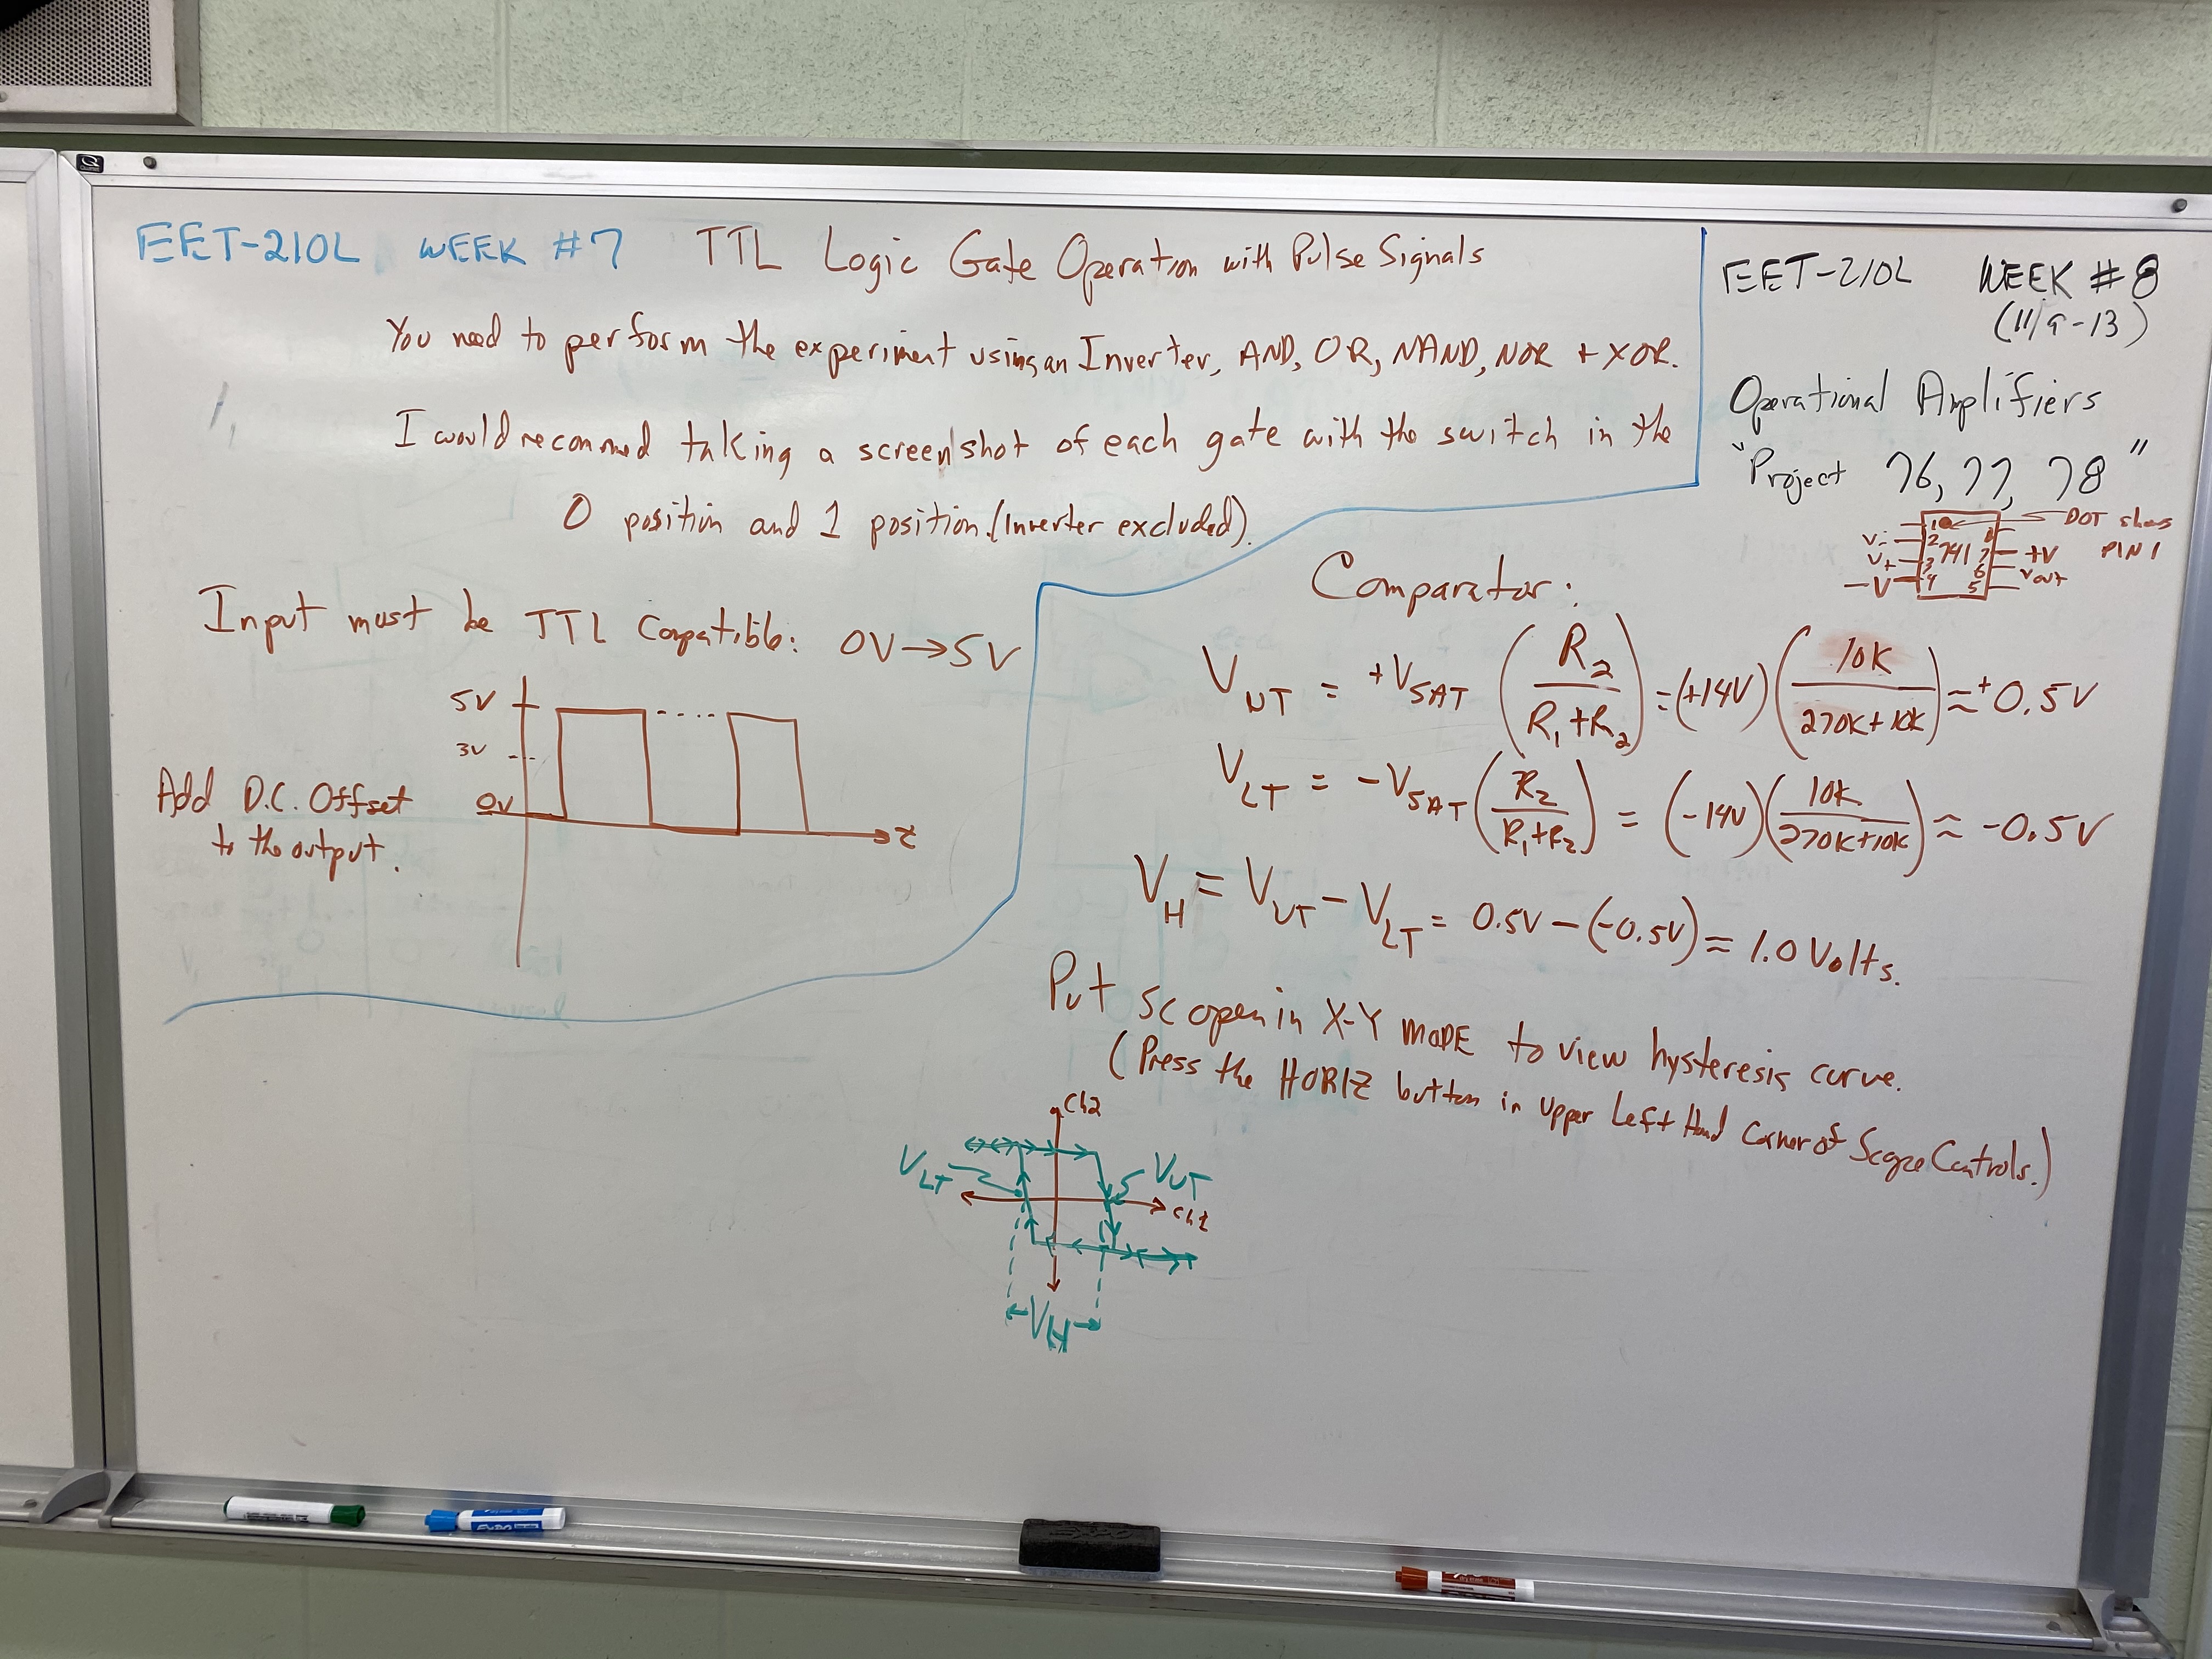 Op Amp notes are on the right side of pic.